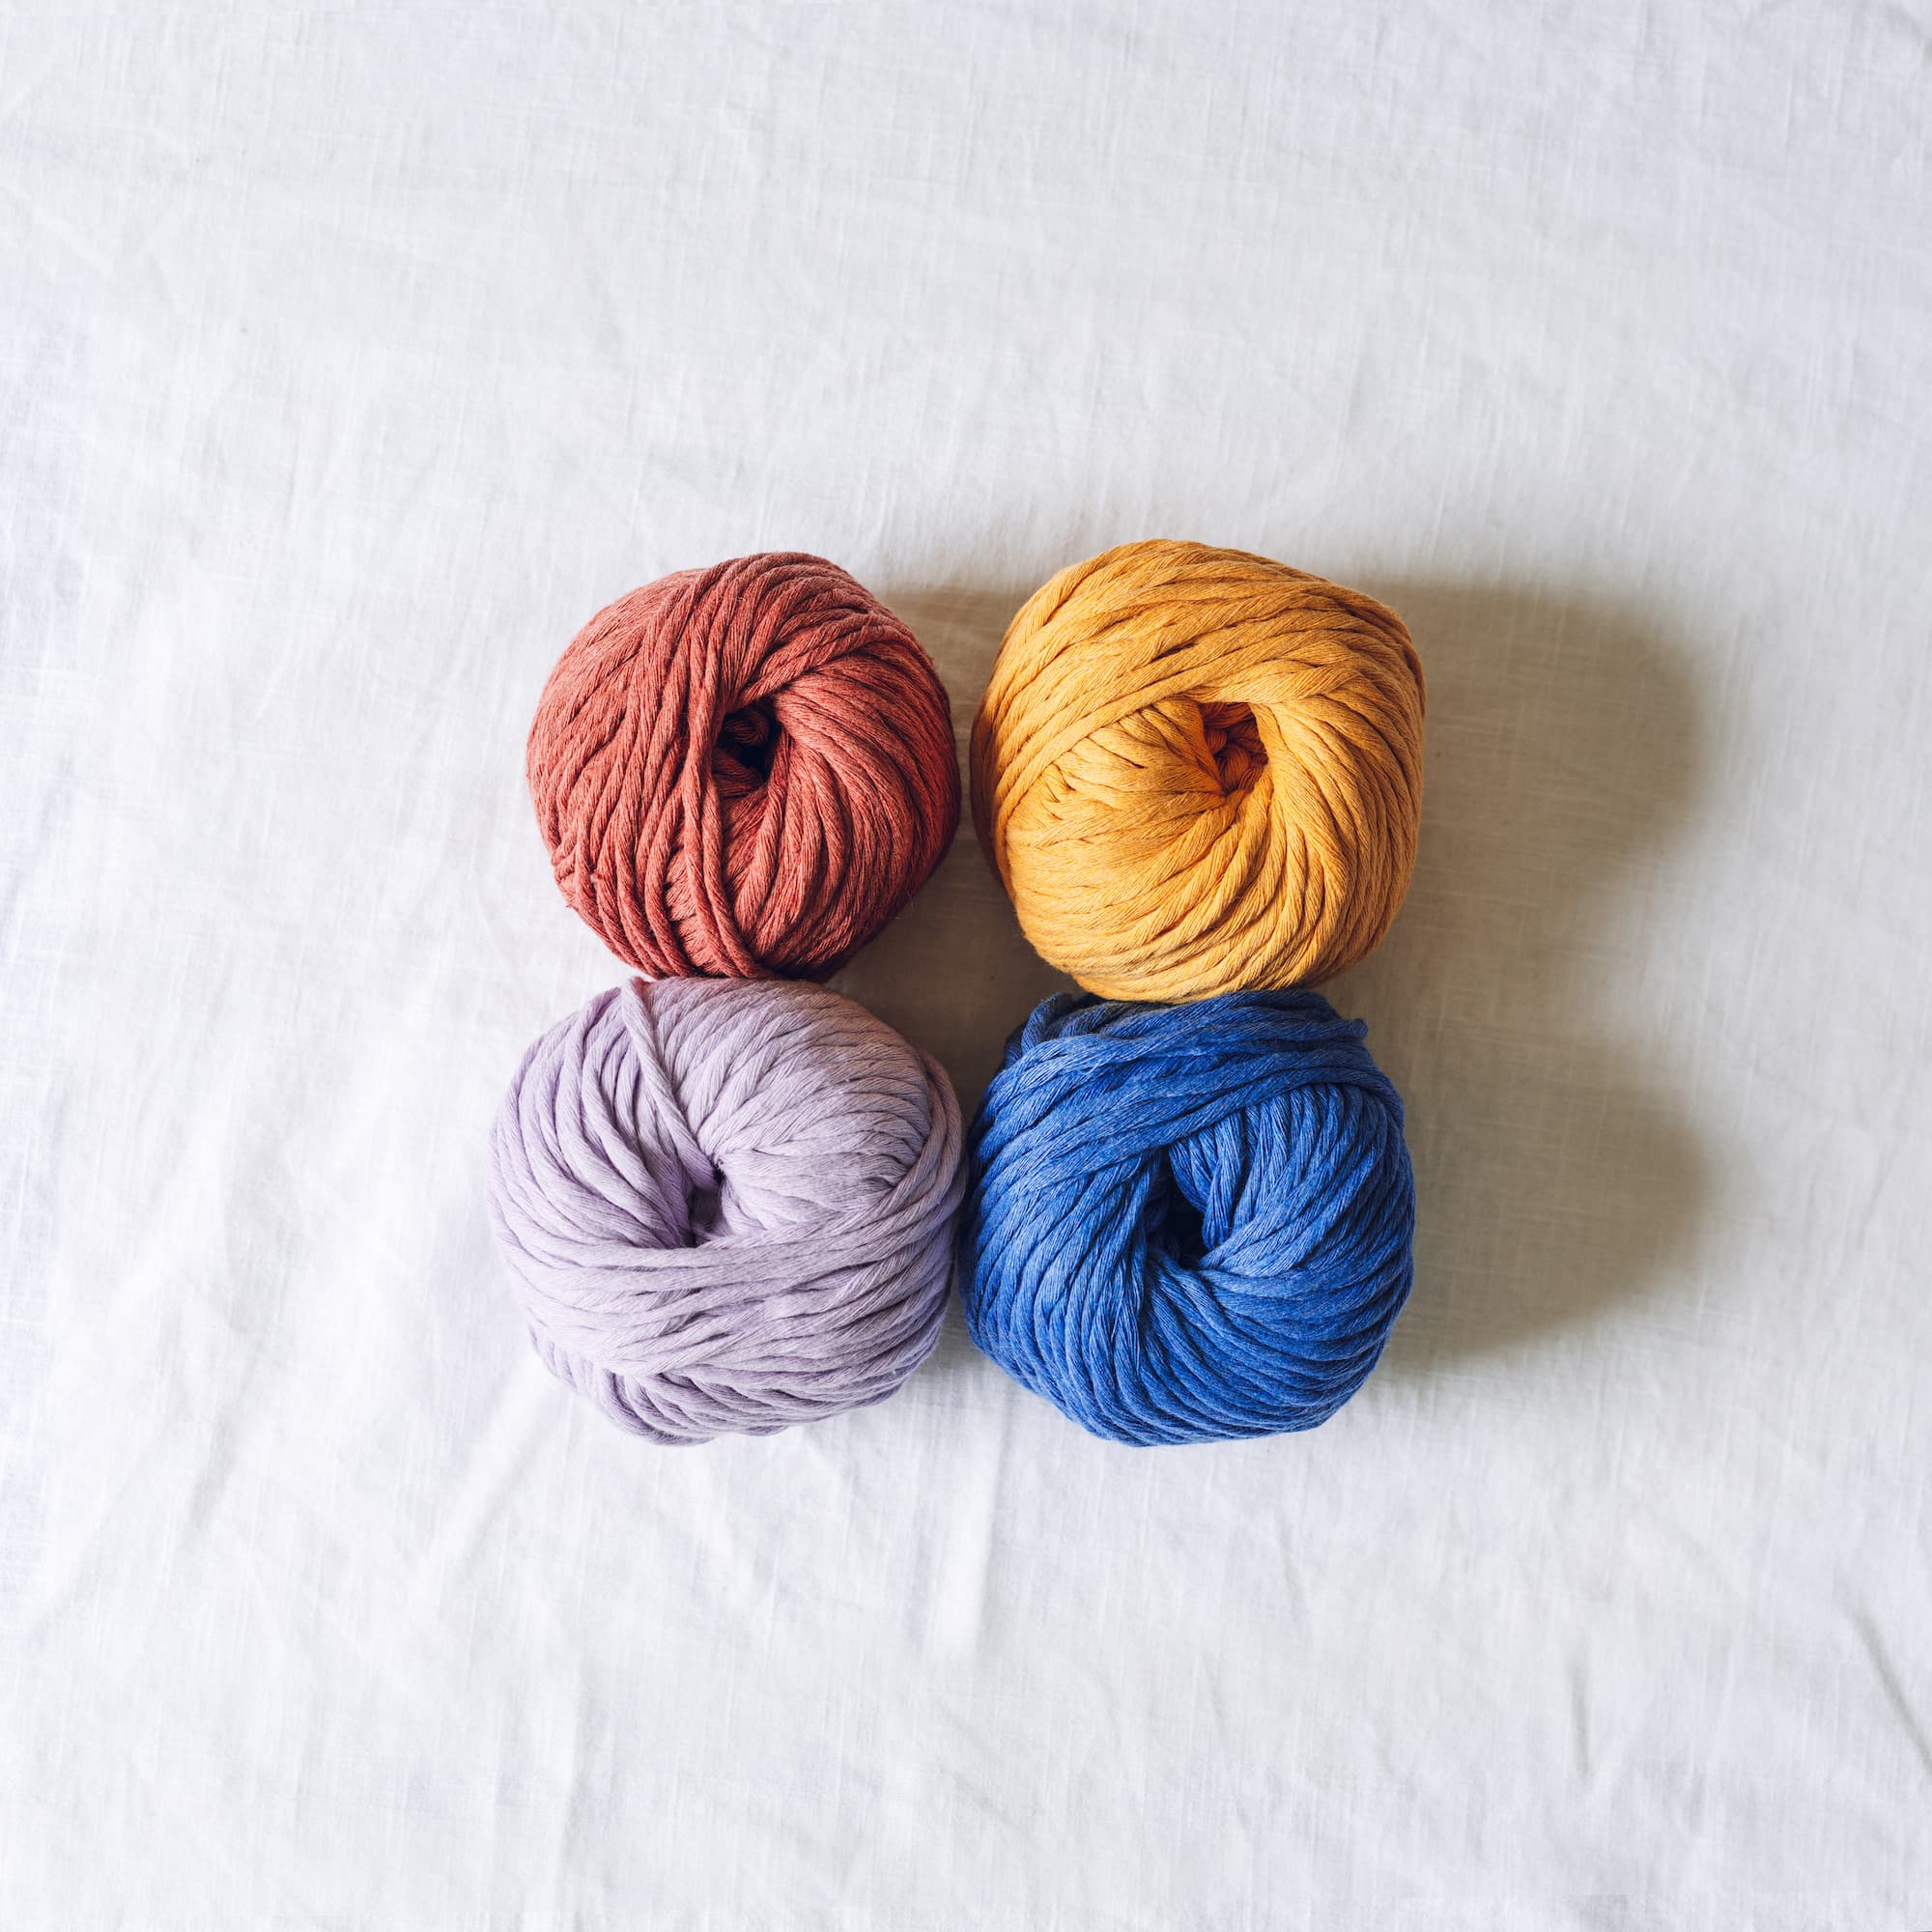 Keep Calm and Carry Yarn Bundle for Beginners